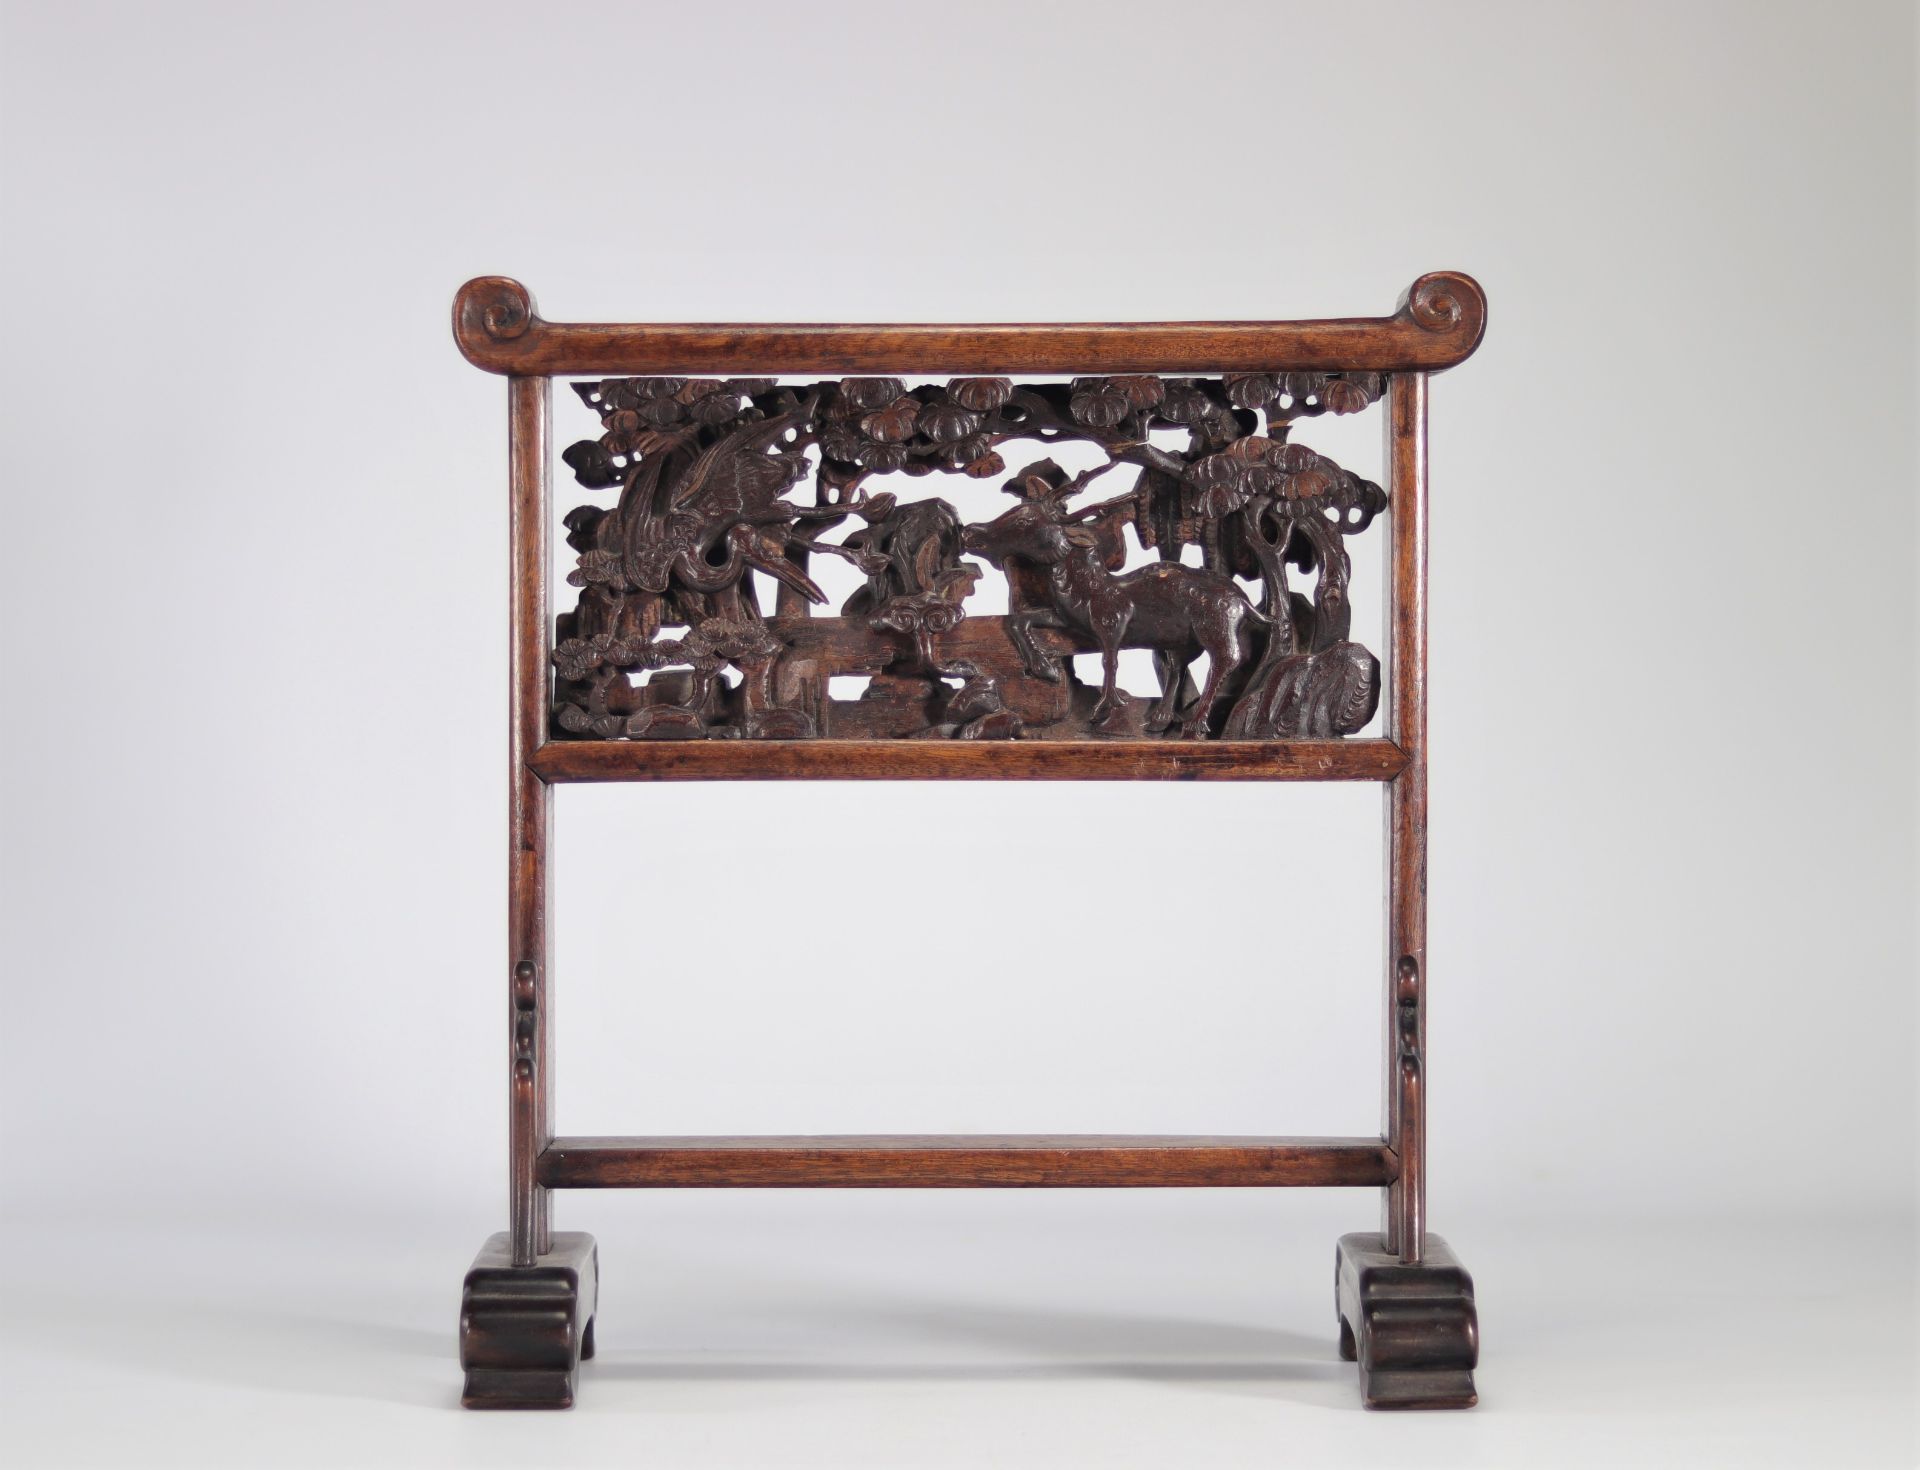 Carved wooden brush holder decorated with figures and deers from Qing period (æ¸…æœ)